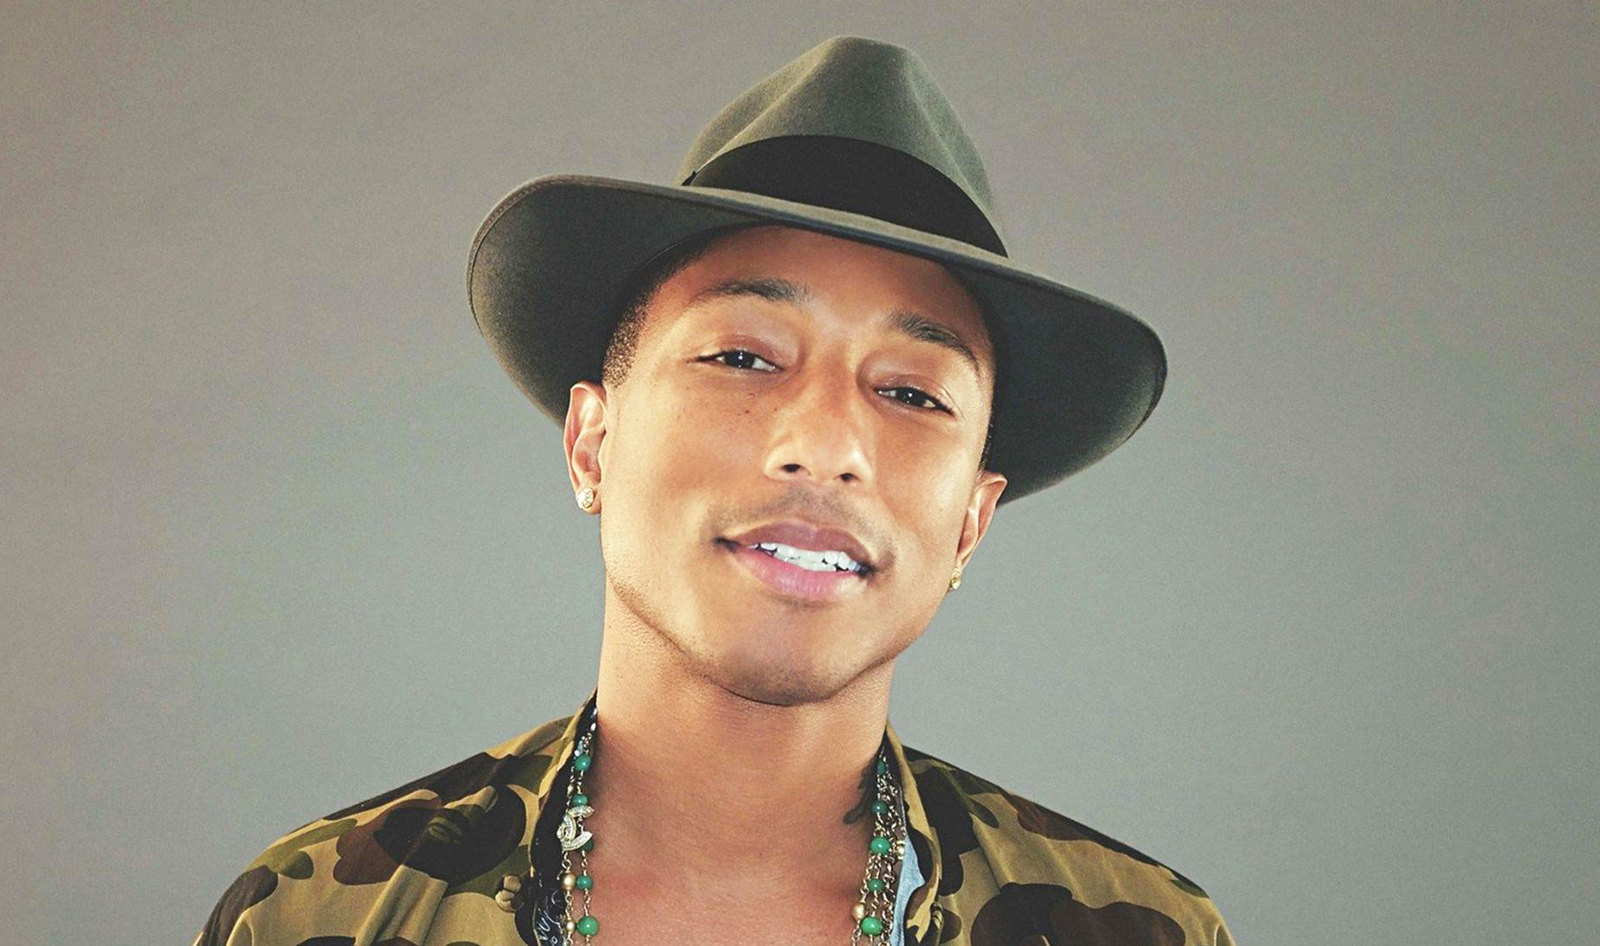 44-facts-about-pharrell-williams